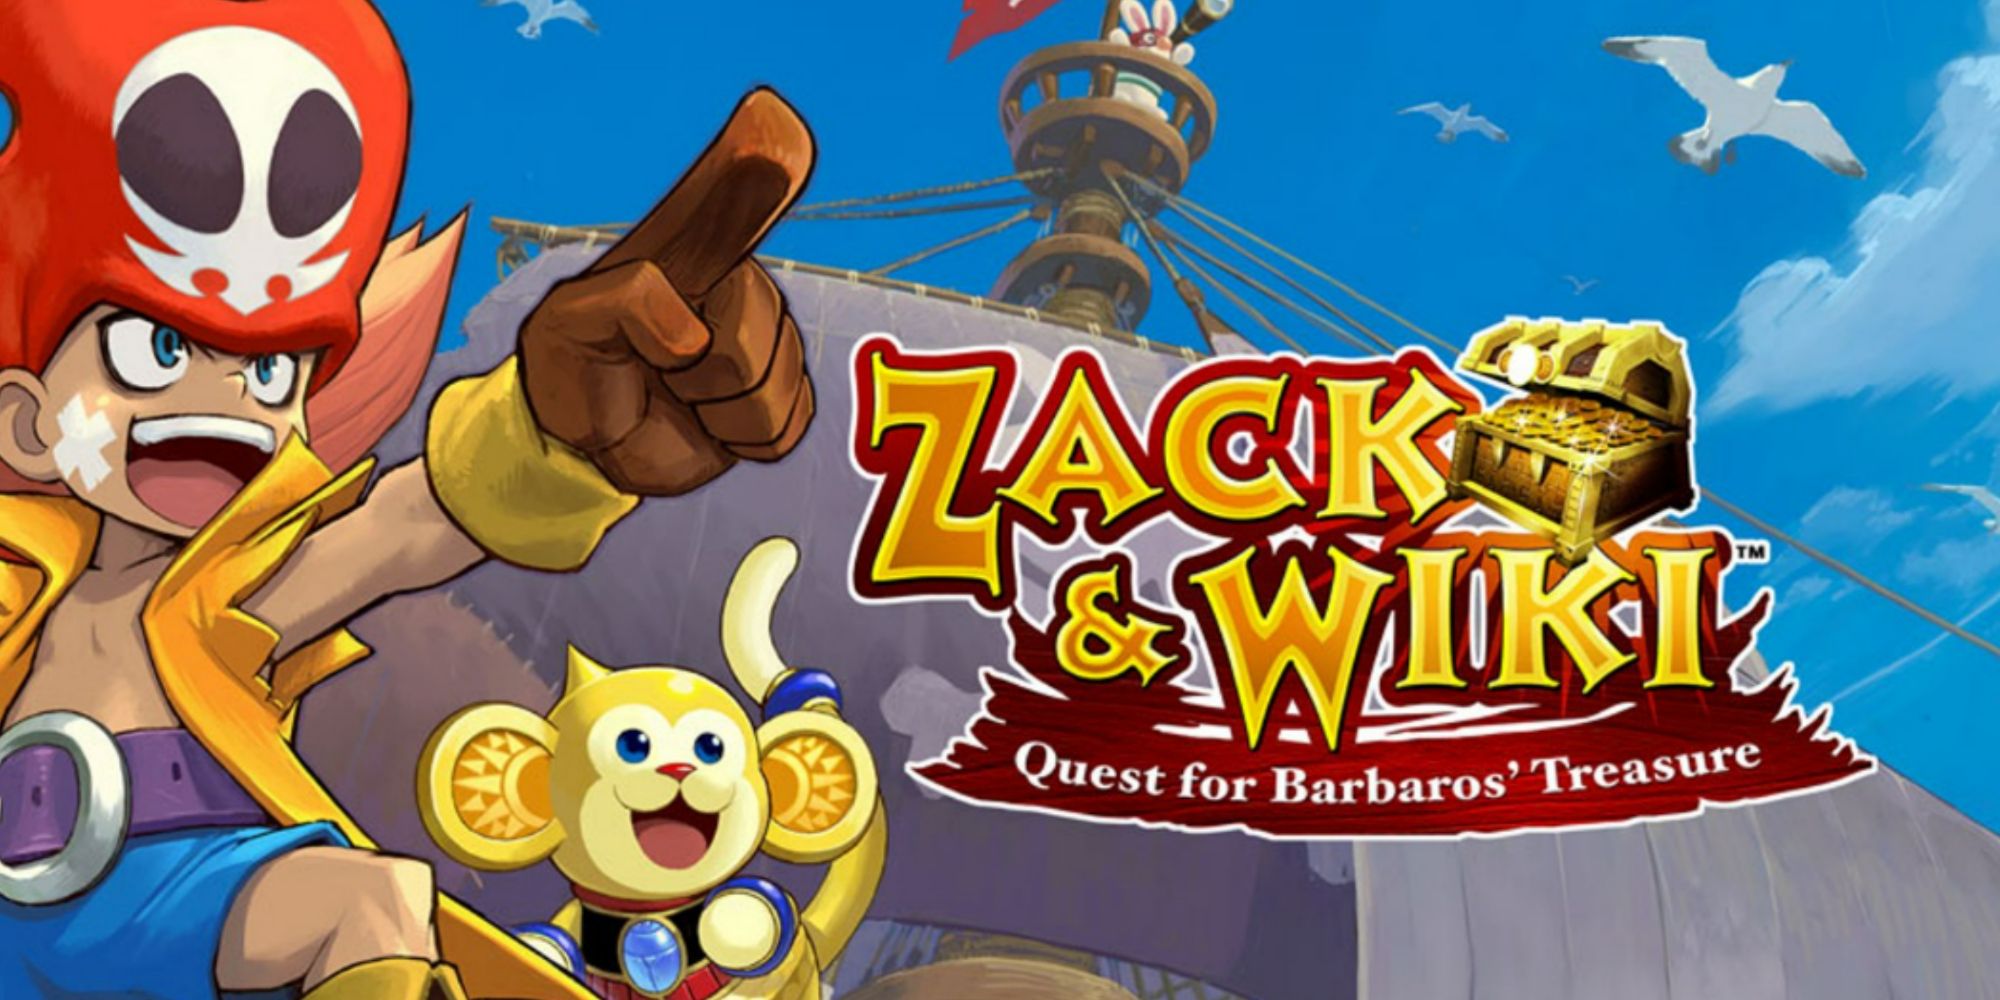 zack and wiki on a big adventure in zack and wiki quest for barbaros' treasure